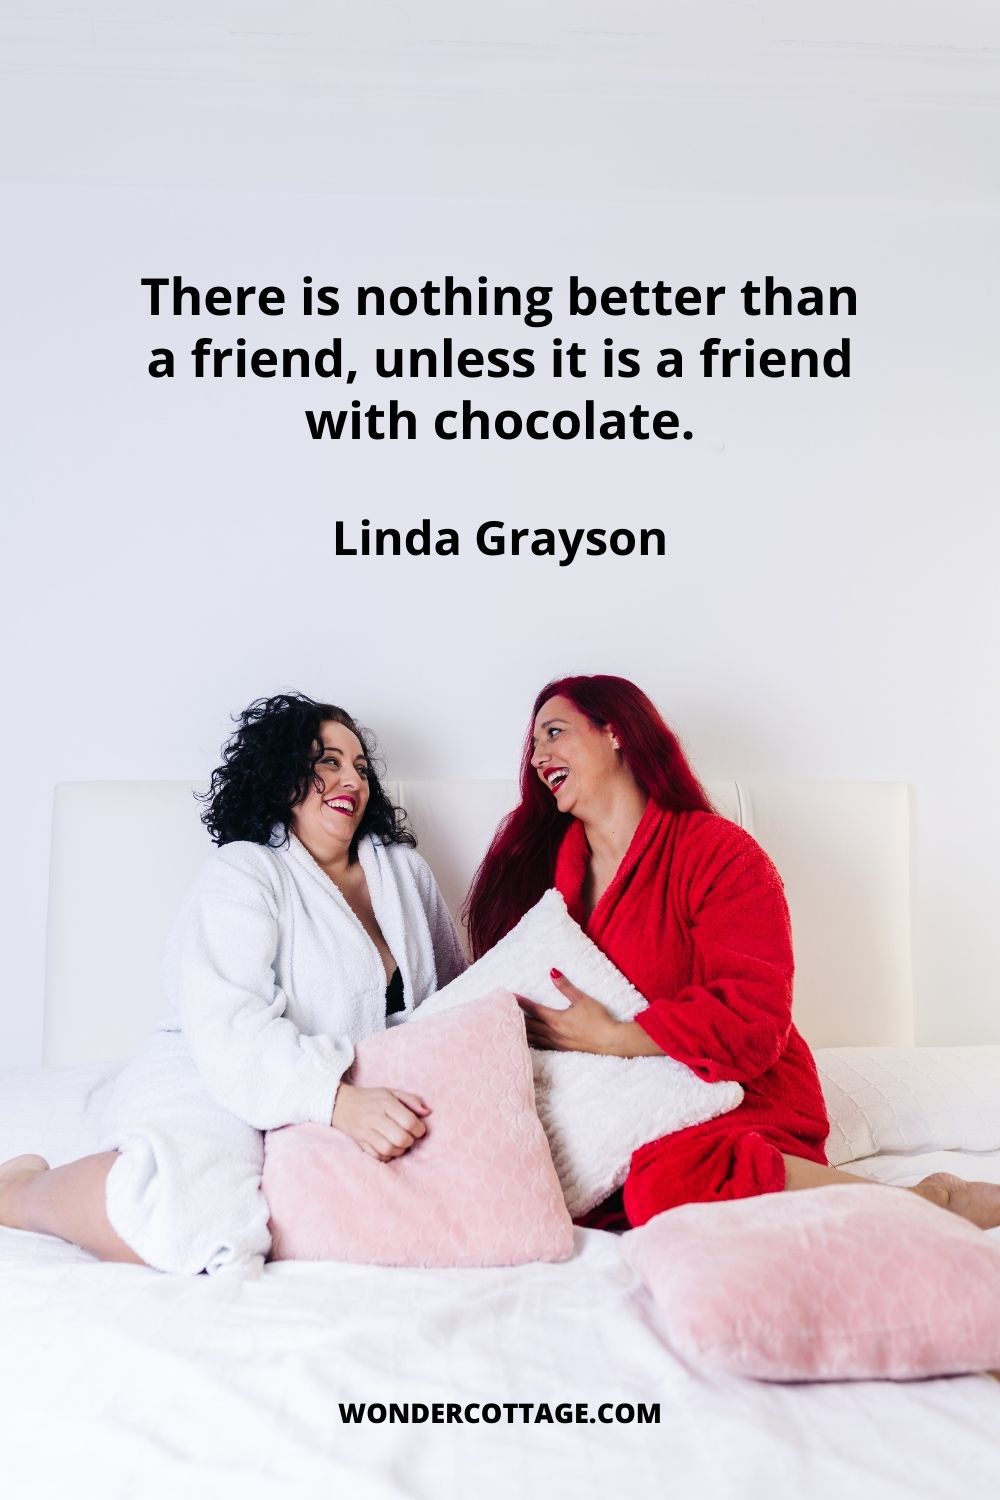 There is nothing better than a friend unless it is a friend with chocolate.